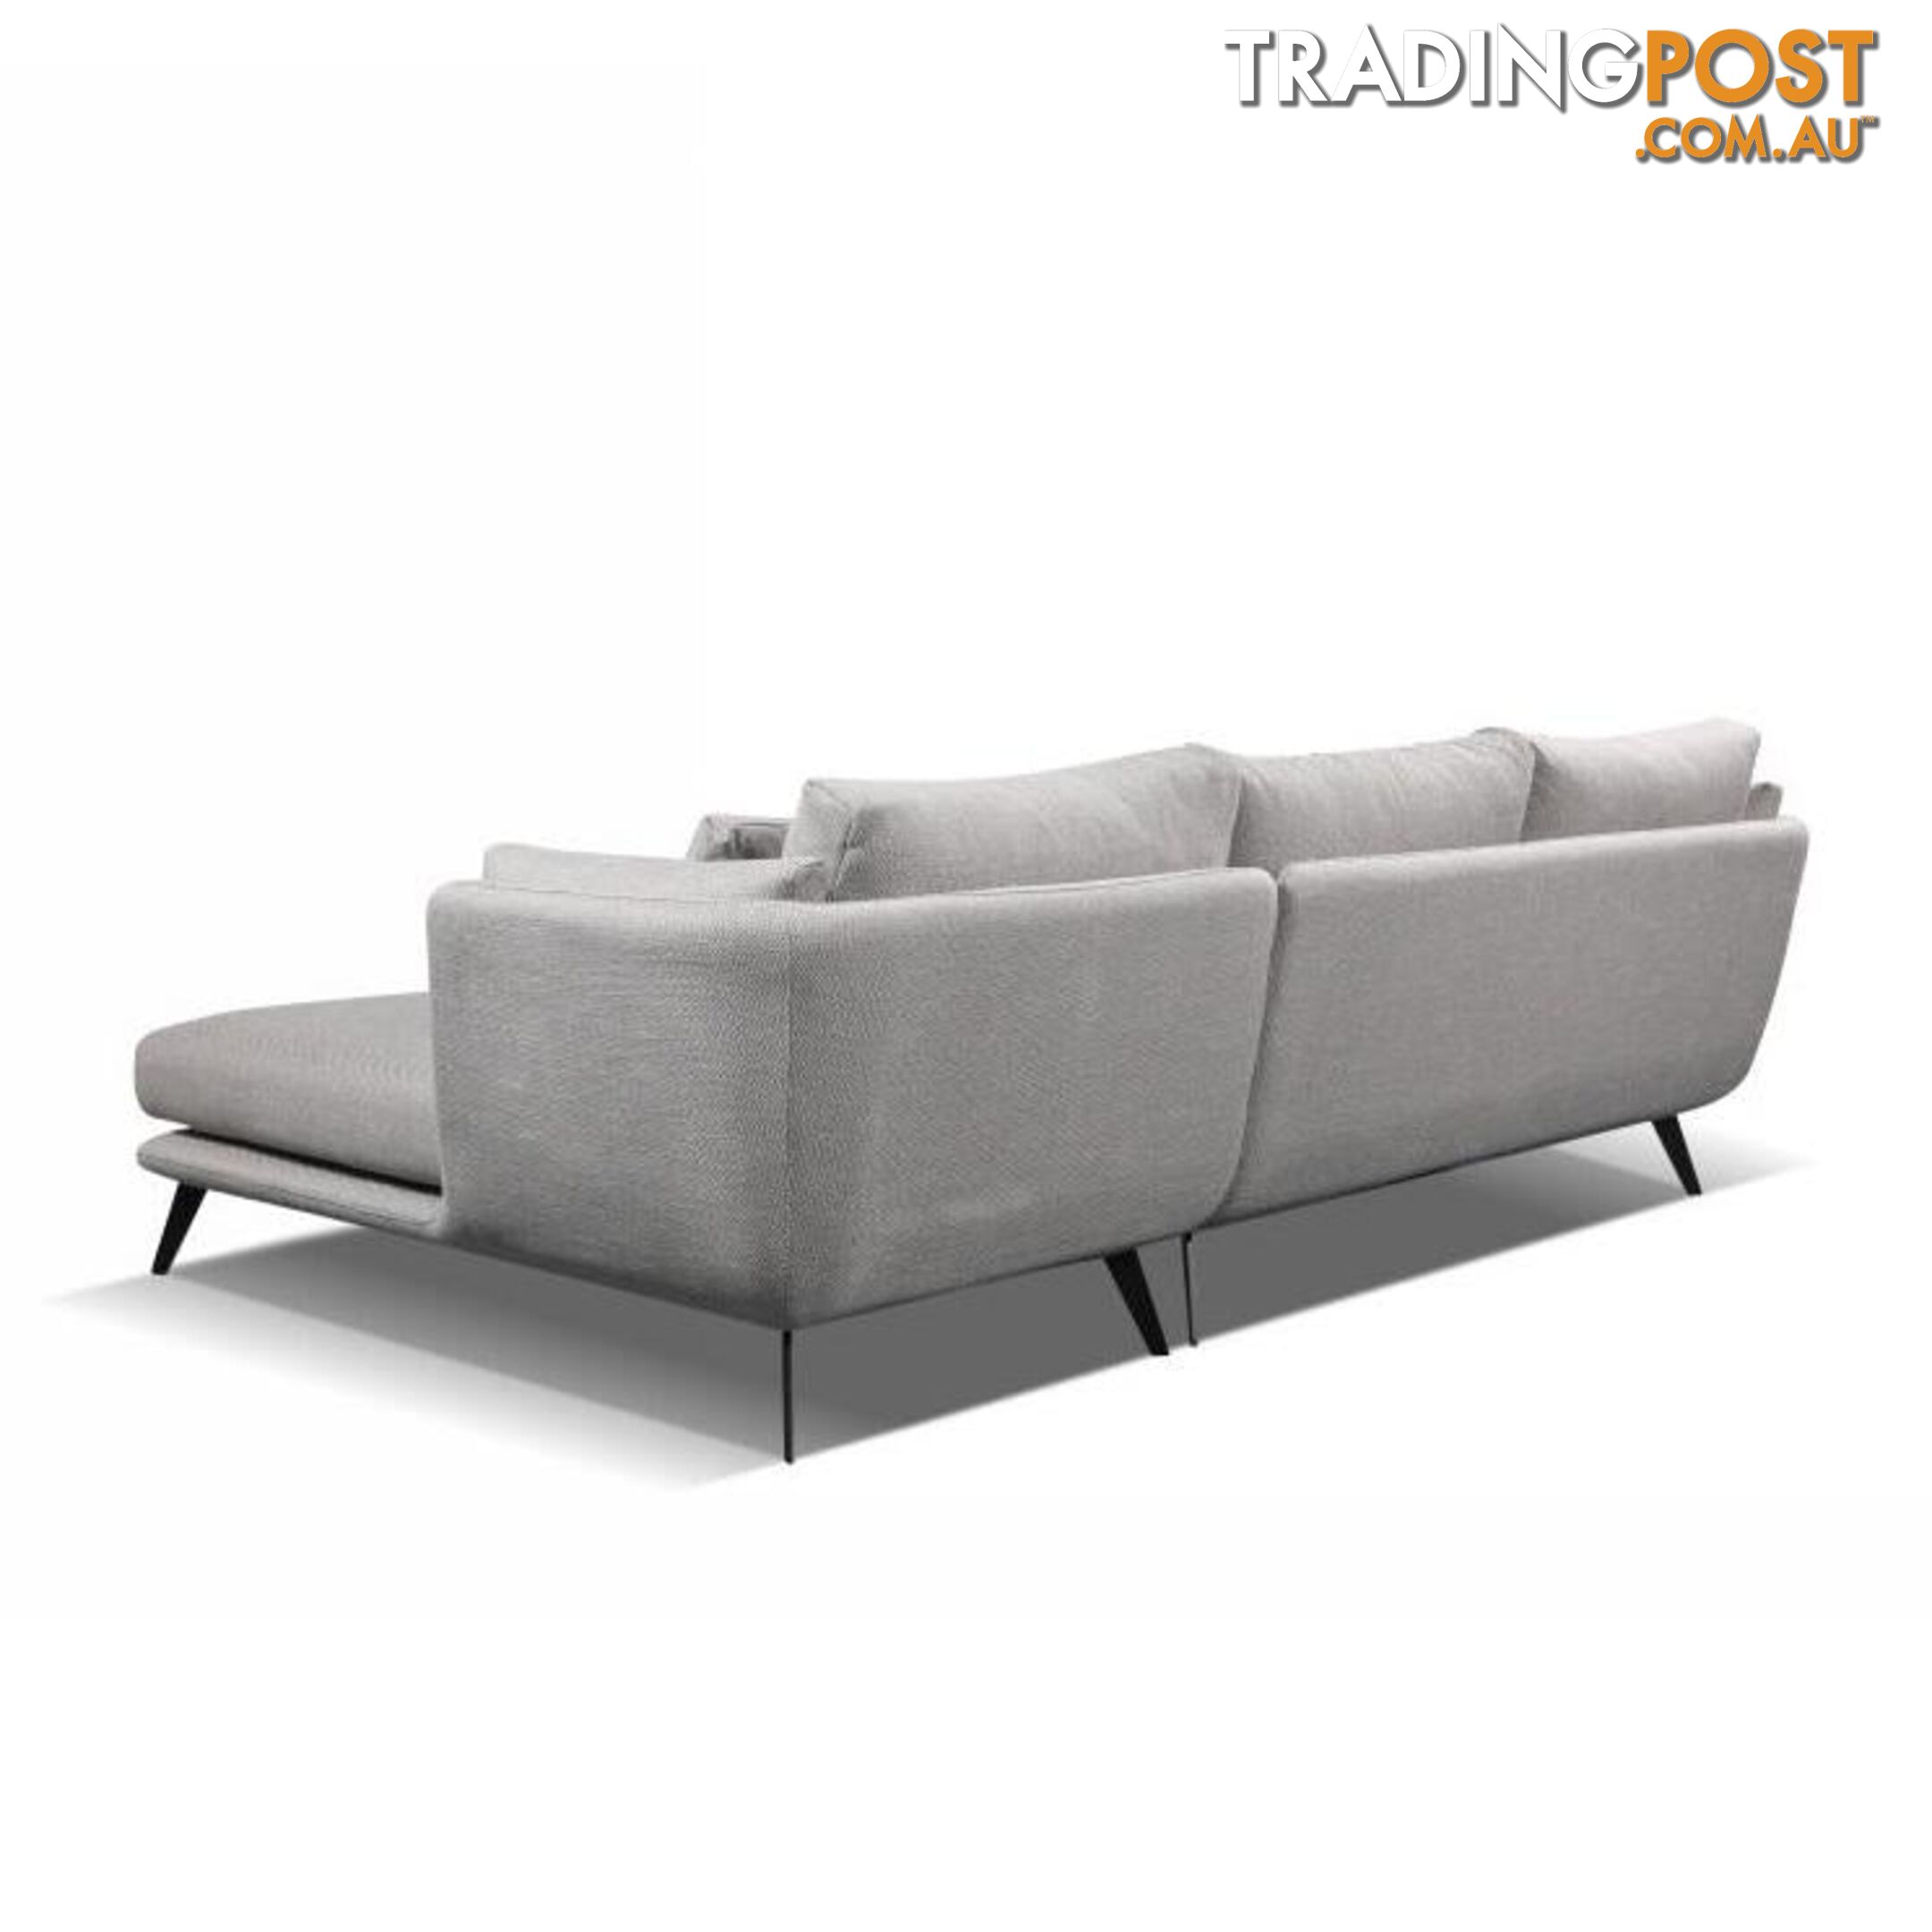 RANNI 3 Seater Sofa With Right Chaise - Warm Grey - HD-9551-R - 9334719001098